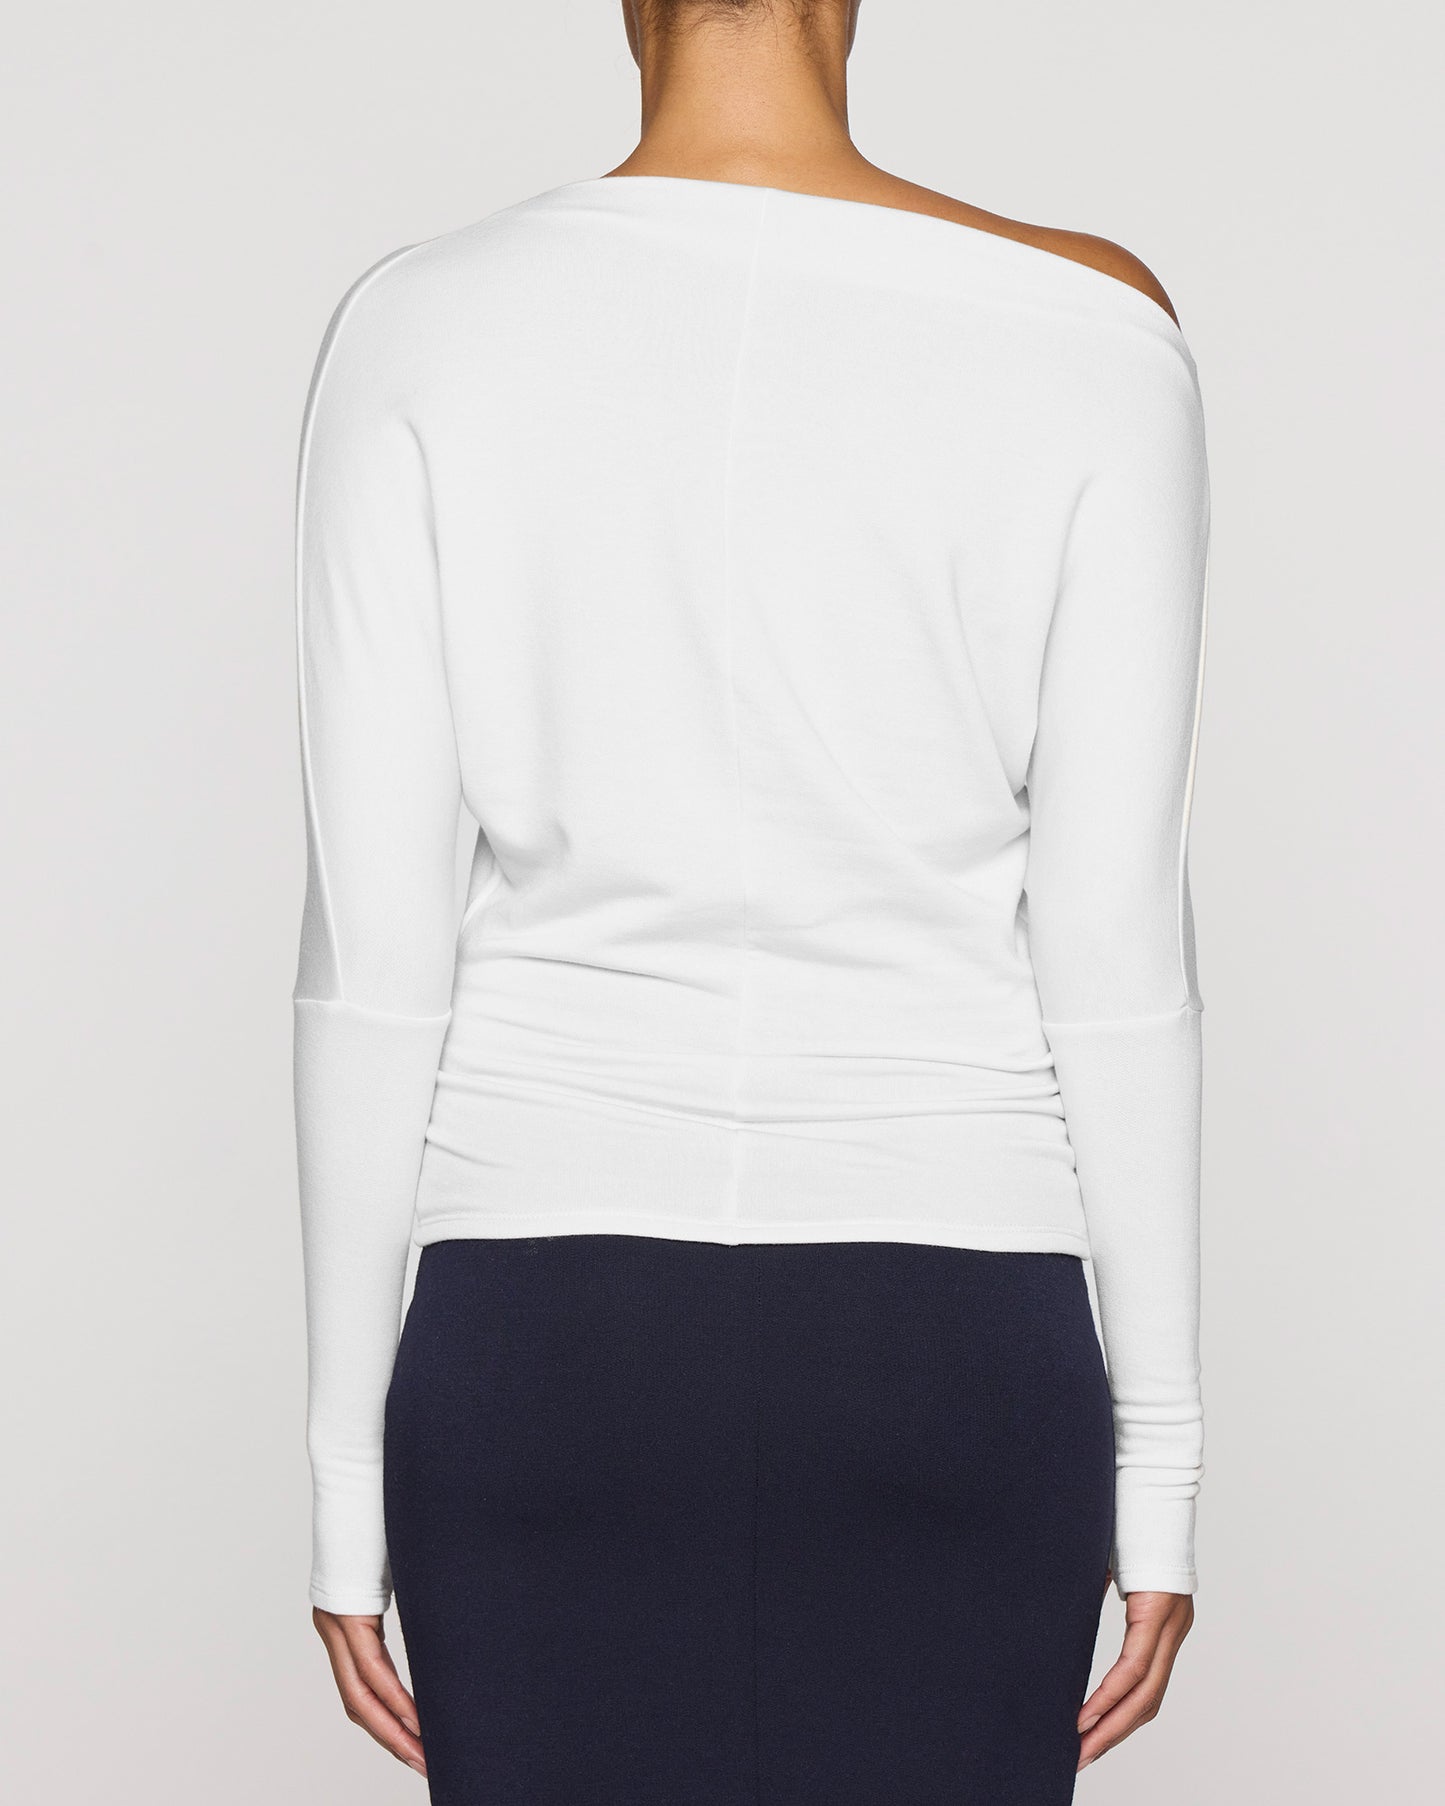 White | The Cindy Top Back